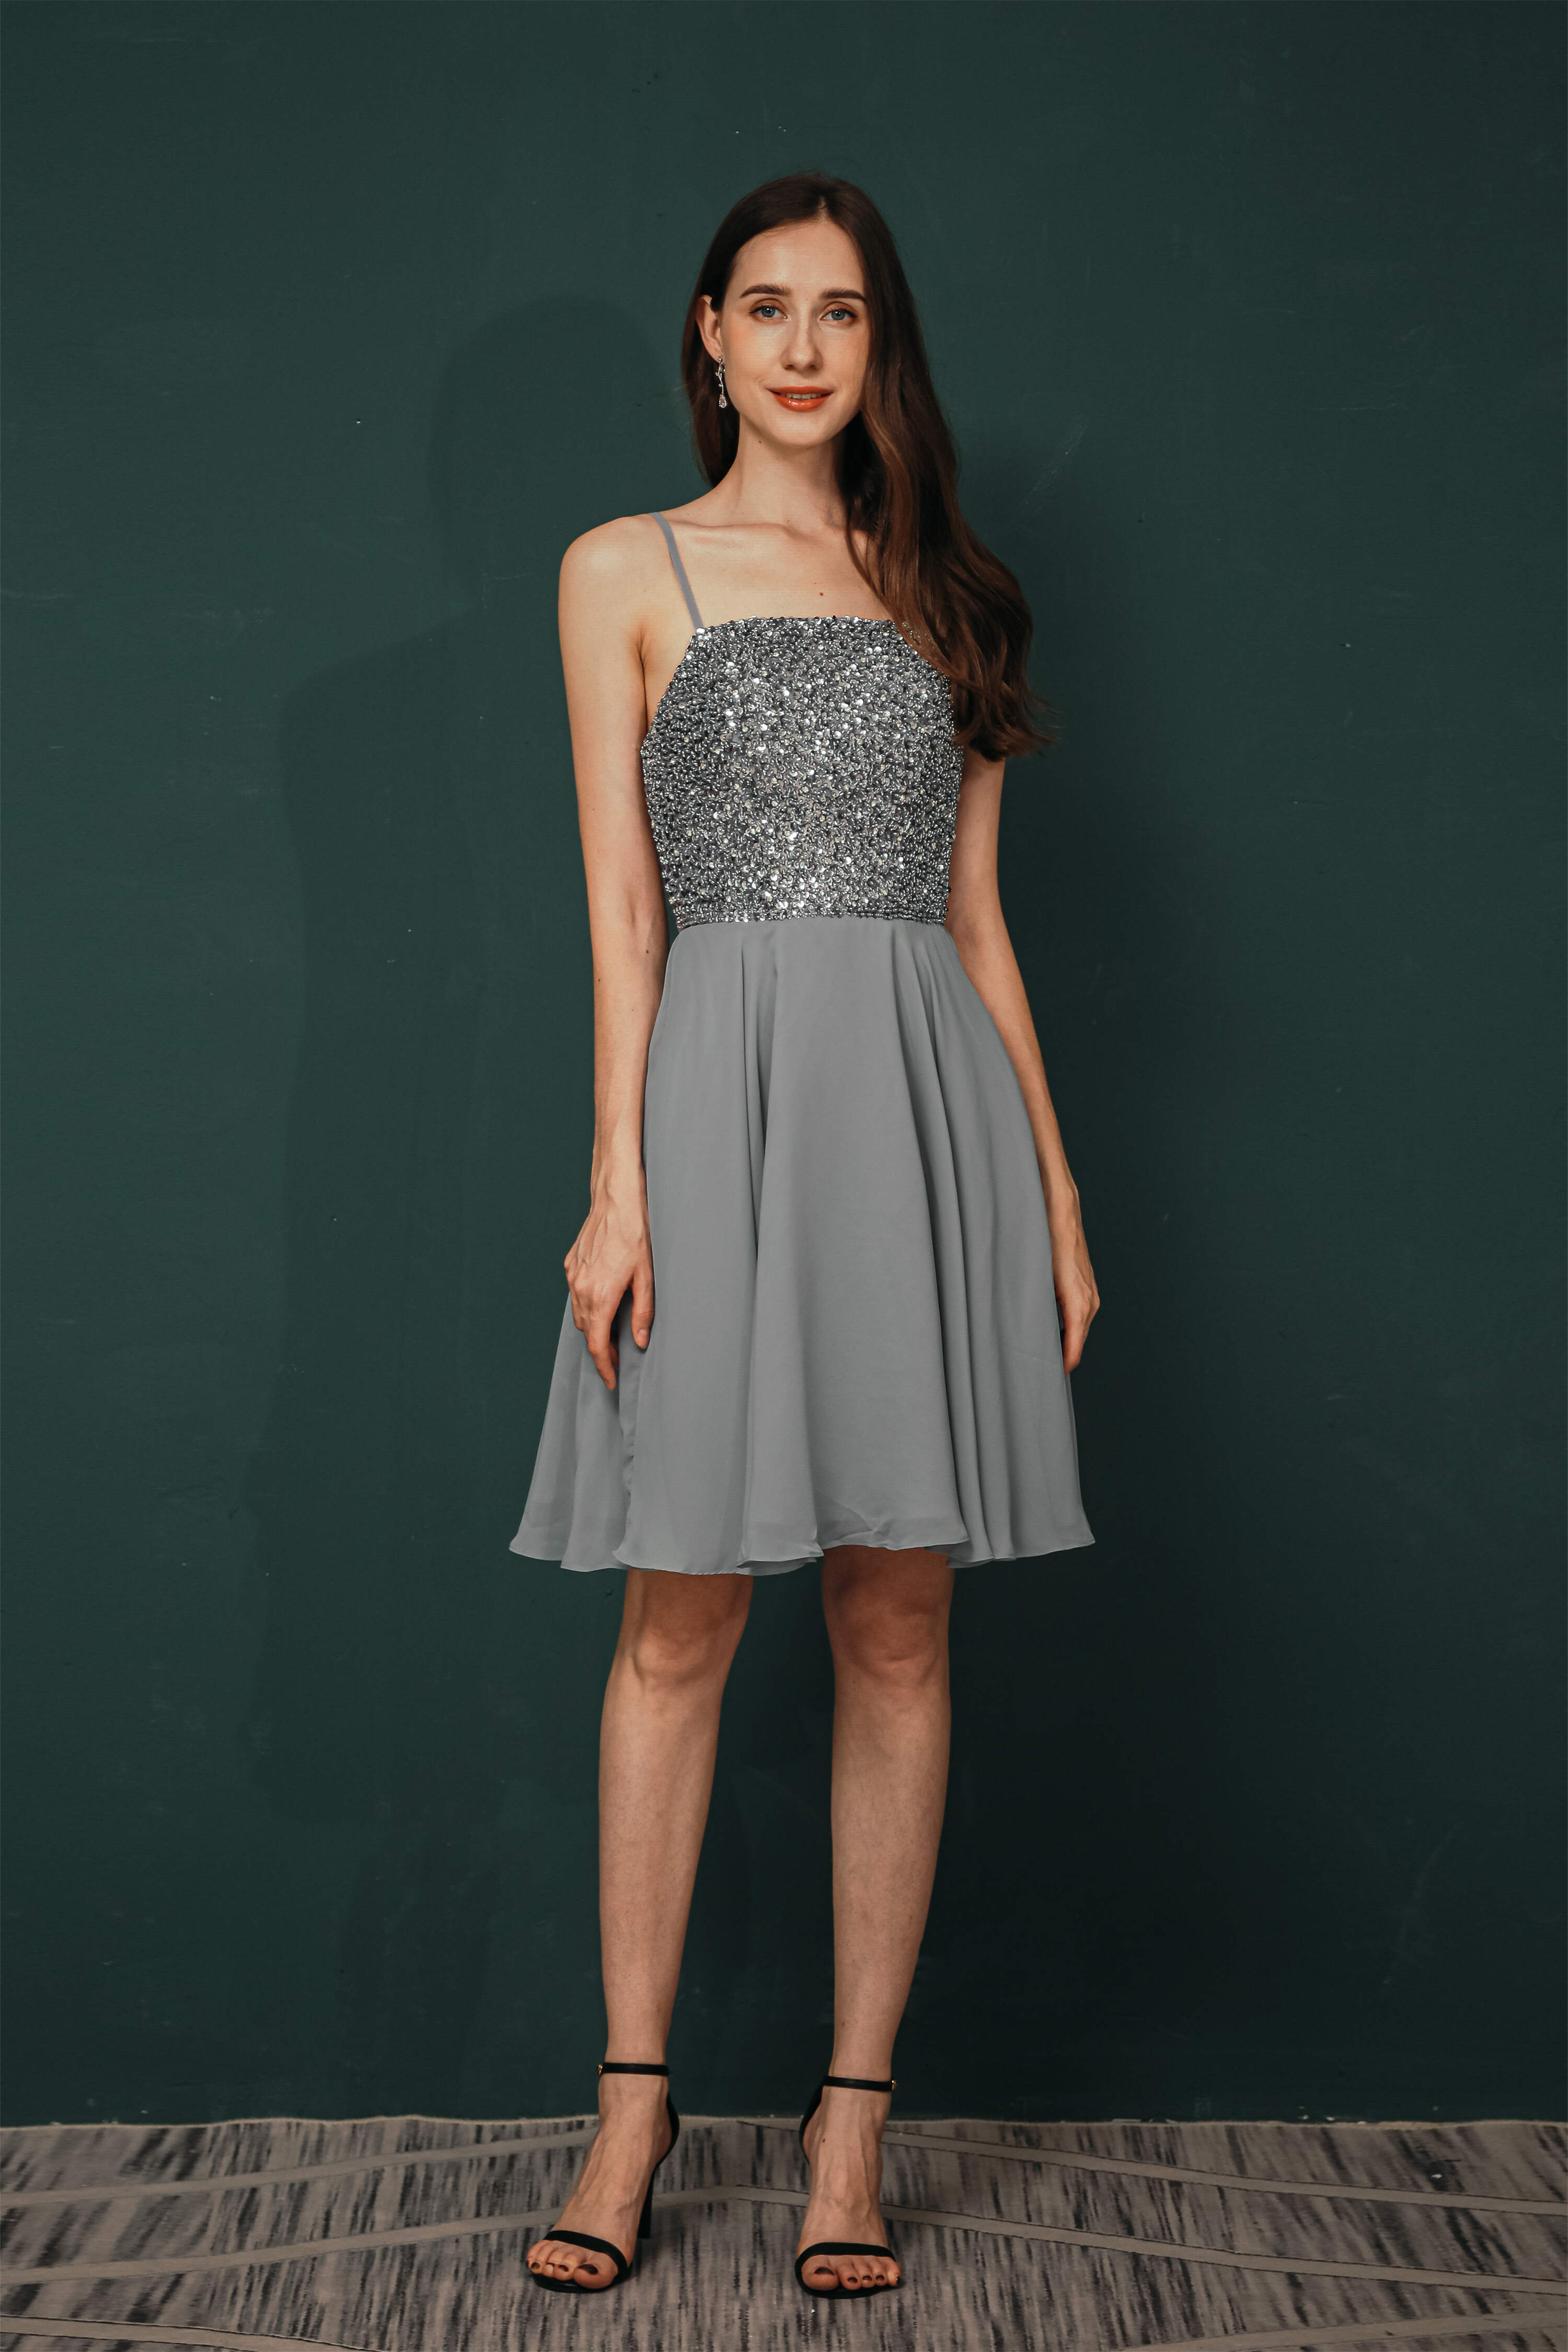 Party Dress Wedding, Short A-Line Strapless Beaded Chiffon Homecoming Dresses